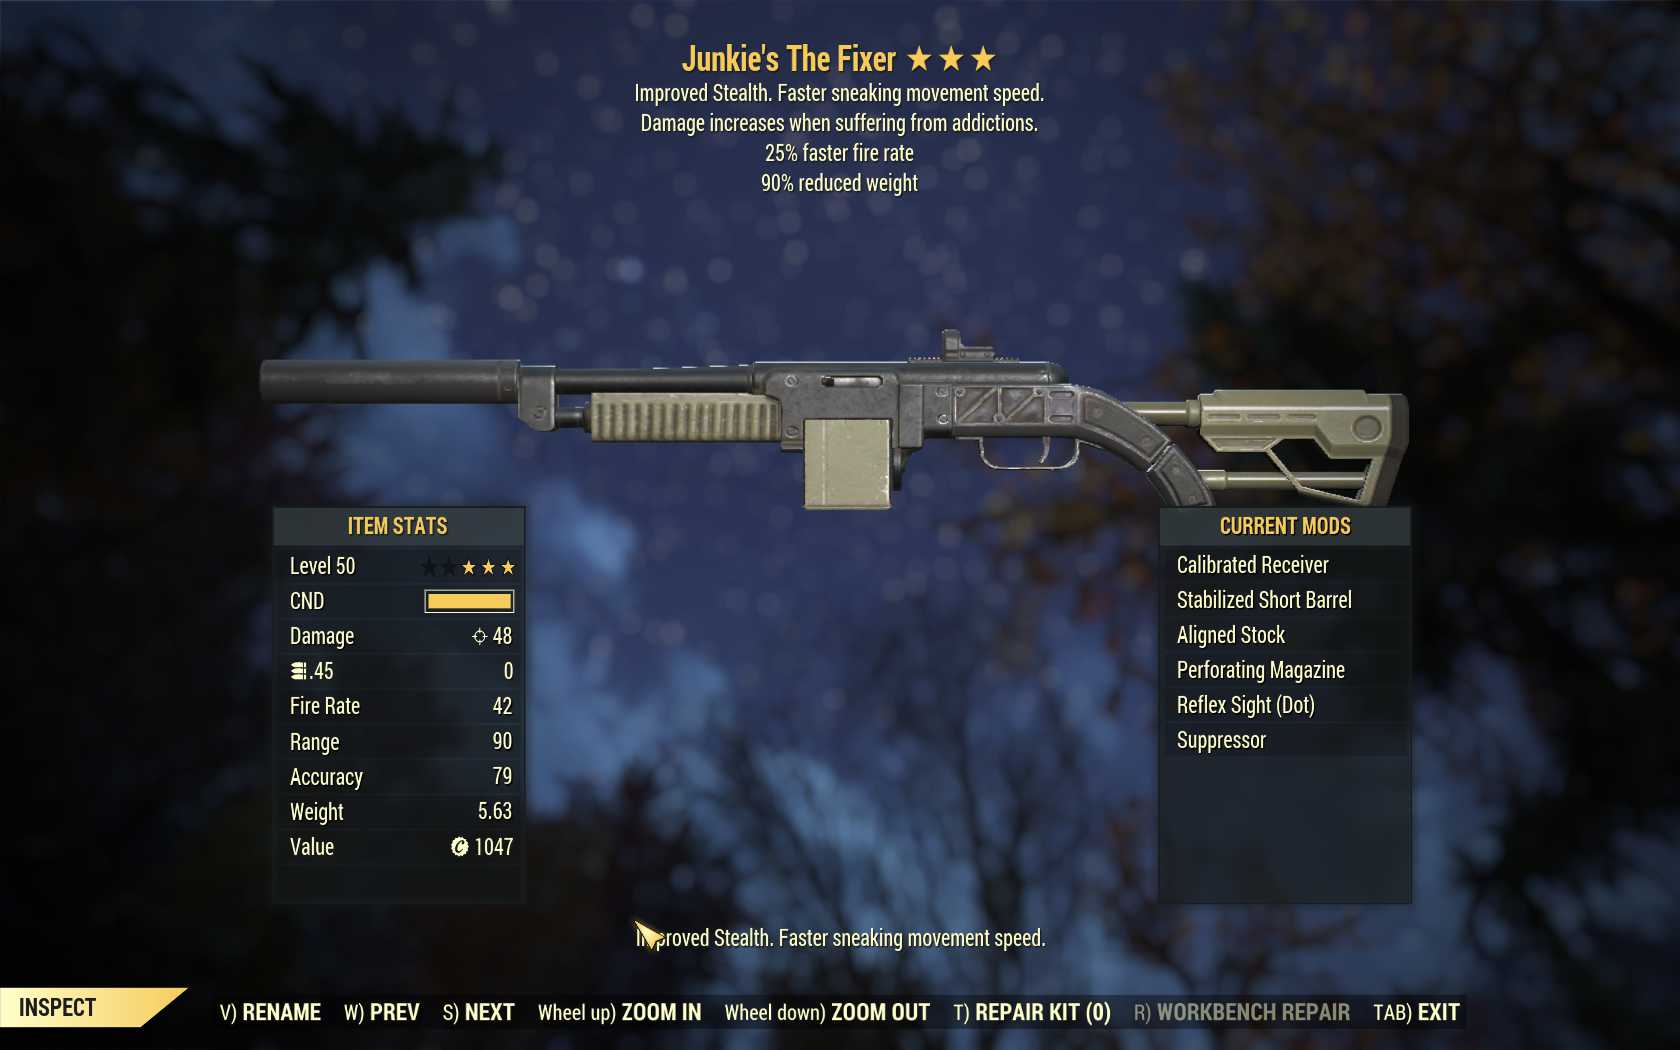 Junkie's The Fixer (25% faster fire rate, 90% reduced weight)